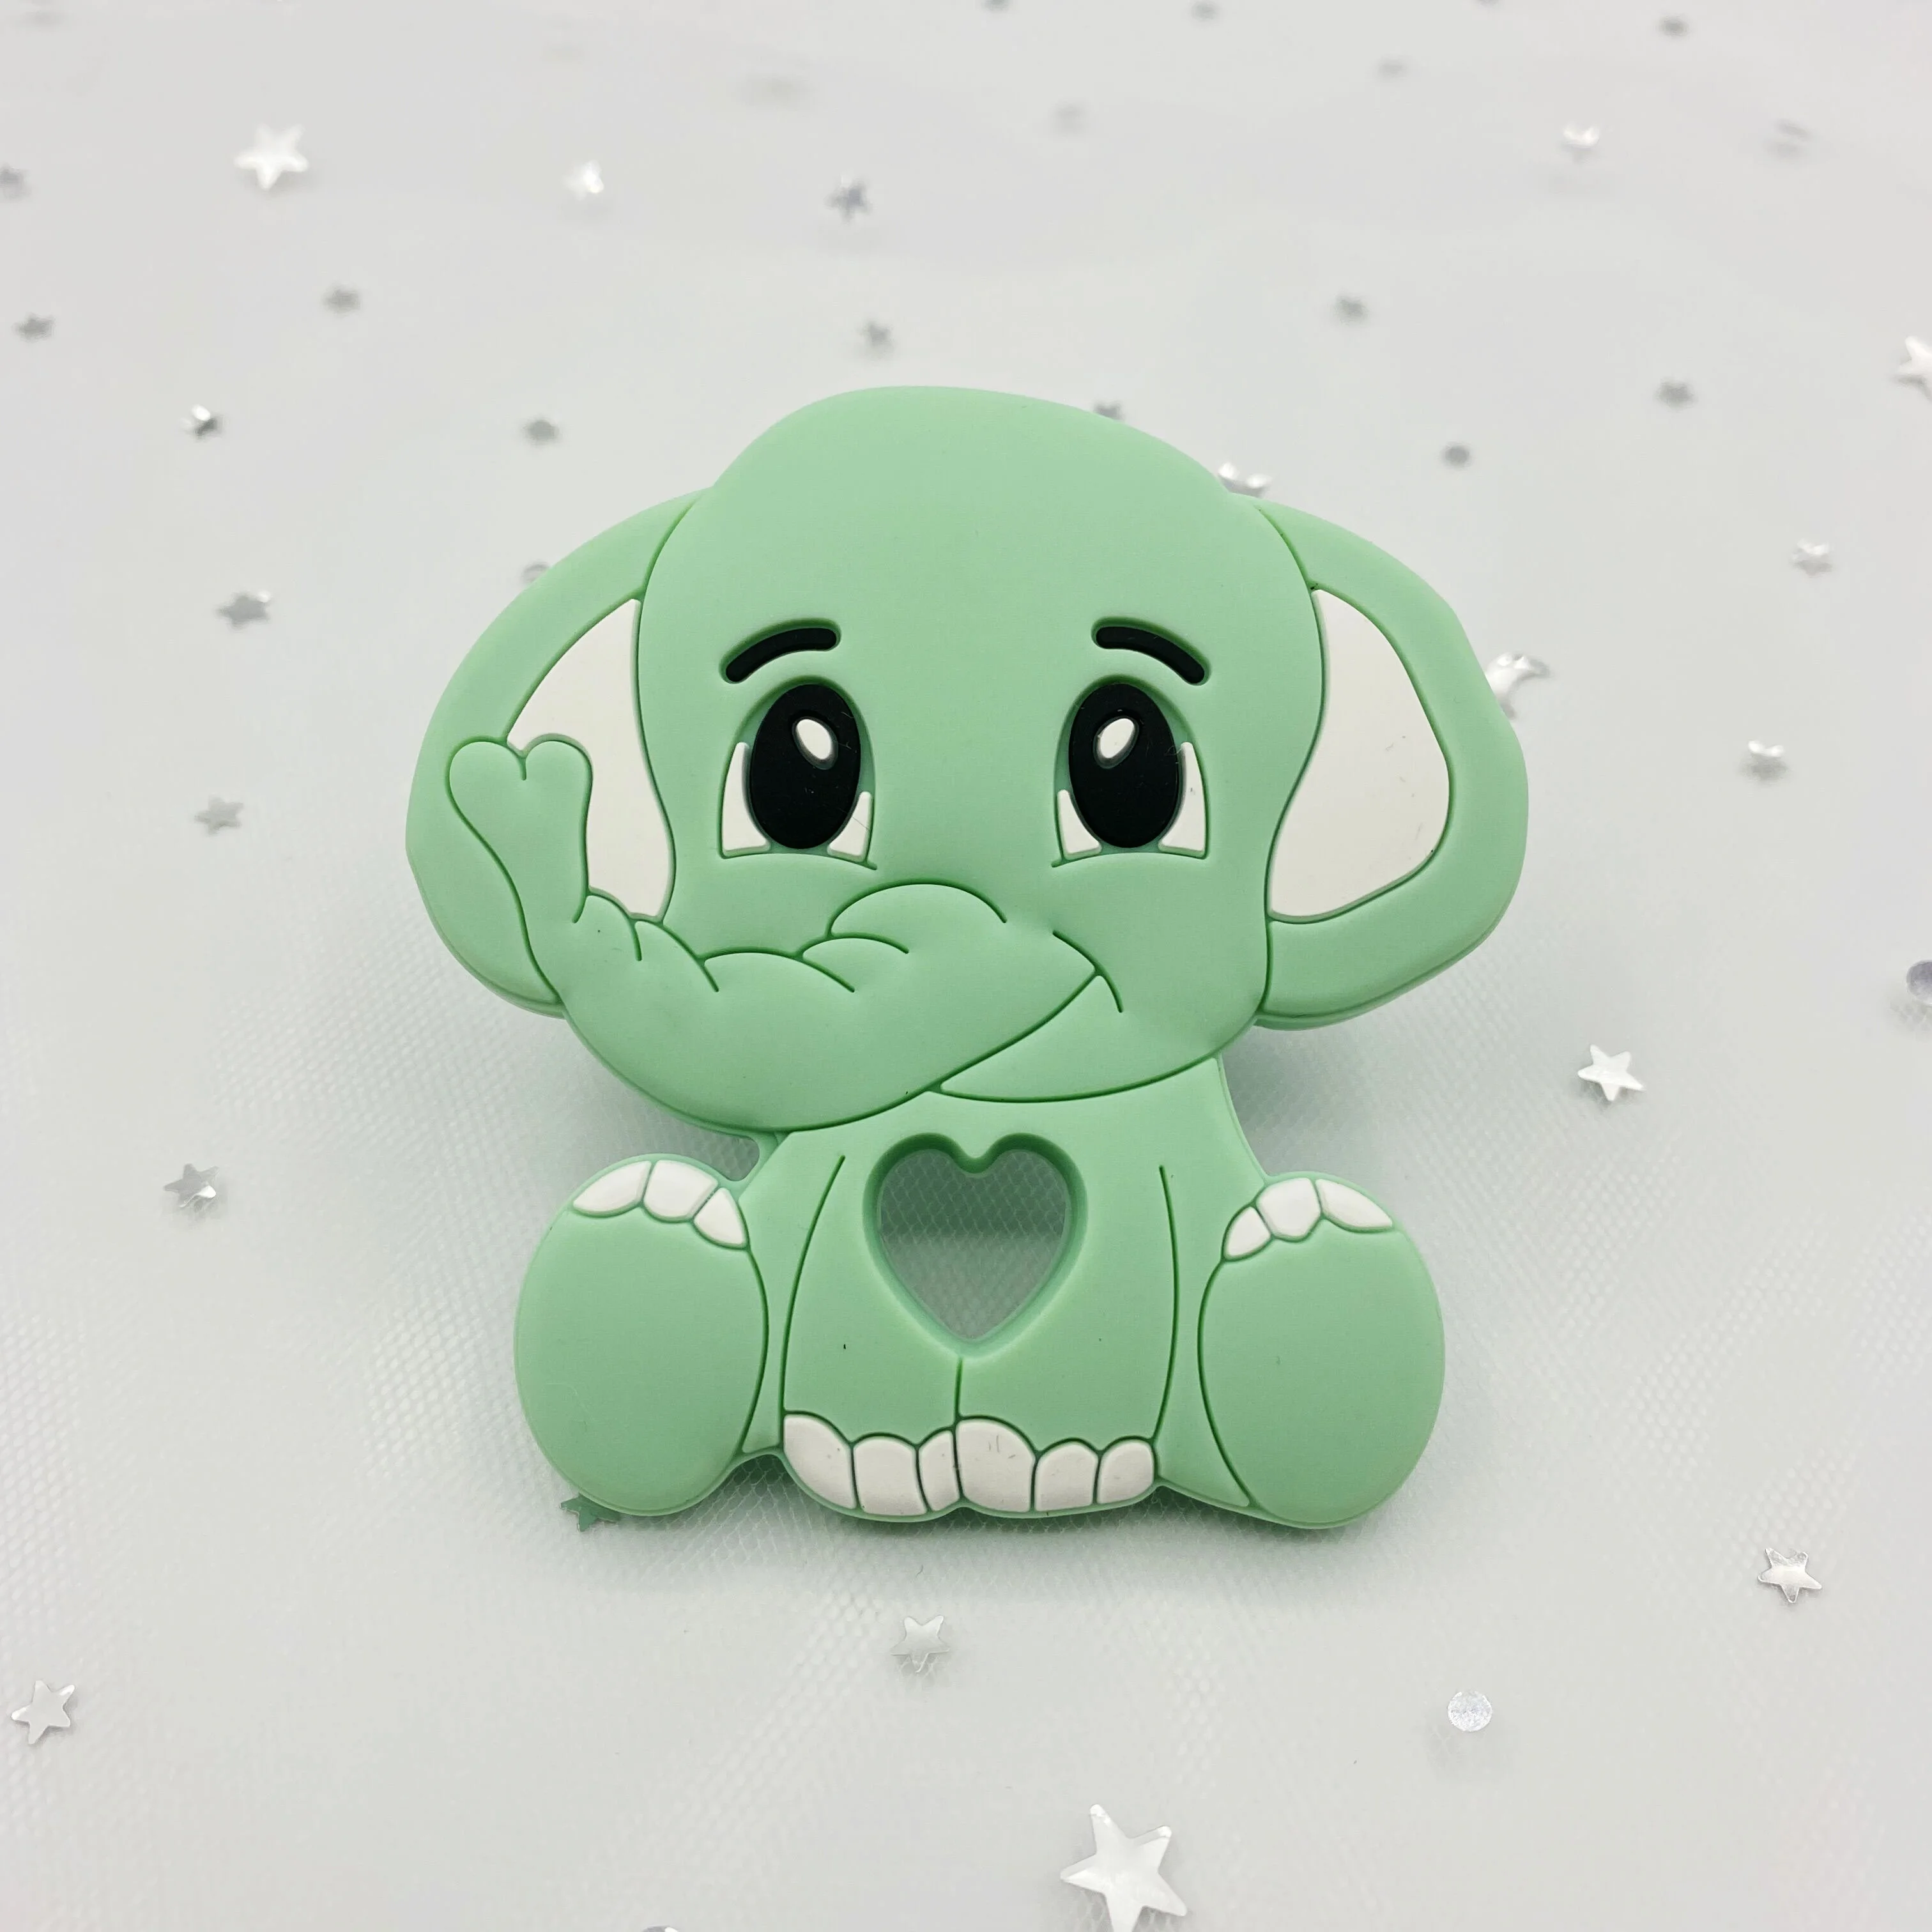 Baby Silicone Teether kids infant Teething Toy Animal Stitch bear Hamster snail rabbit cat dinosaur Beads DIY hippo lion gift baby teething items at 4 months	 Baby Teething Items